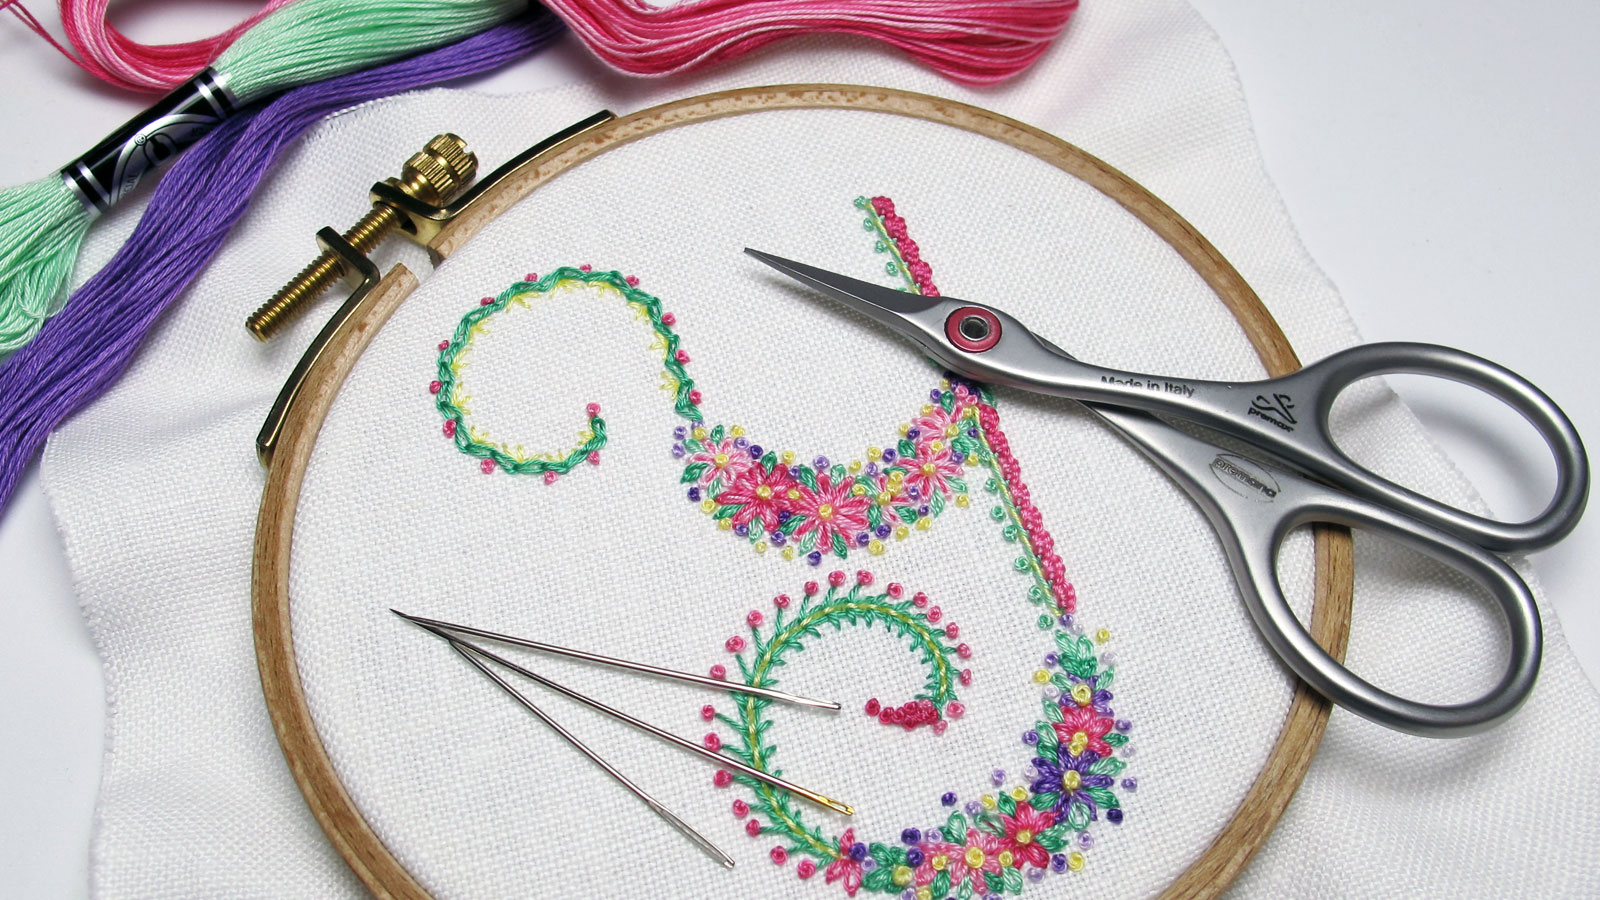 Ribbon Embroidery Patterns Videos Needlenthread Page 2 Tips Tricks And Great Resources For